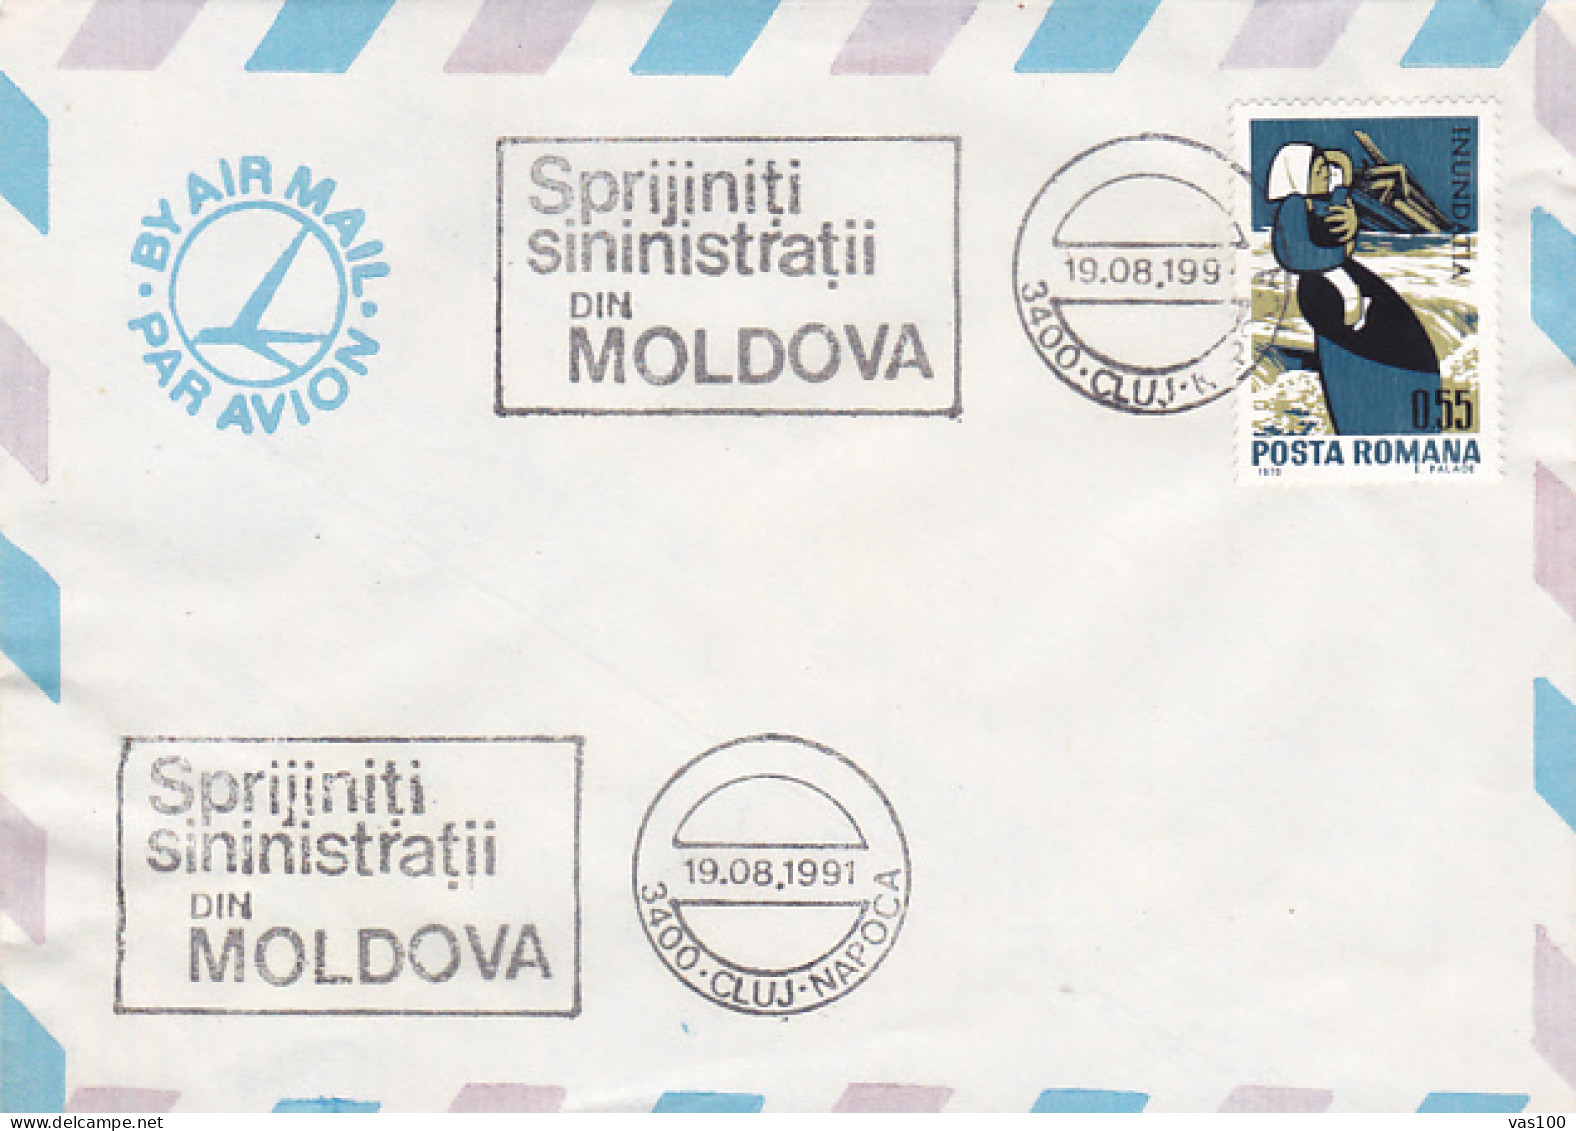 HELS FLOOD VICTIMS CAMPAIGN, SPECIAL POSTMARKS AND STAMP ON COVER, 1991, ROMANIA - Covers & Documents